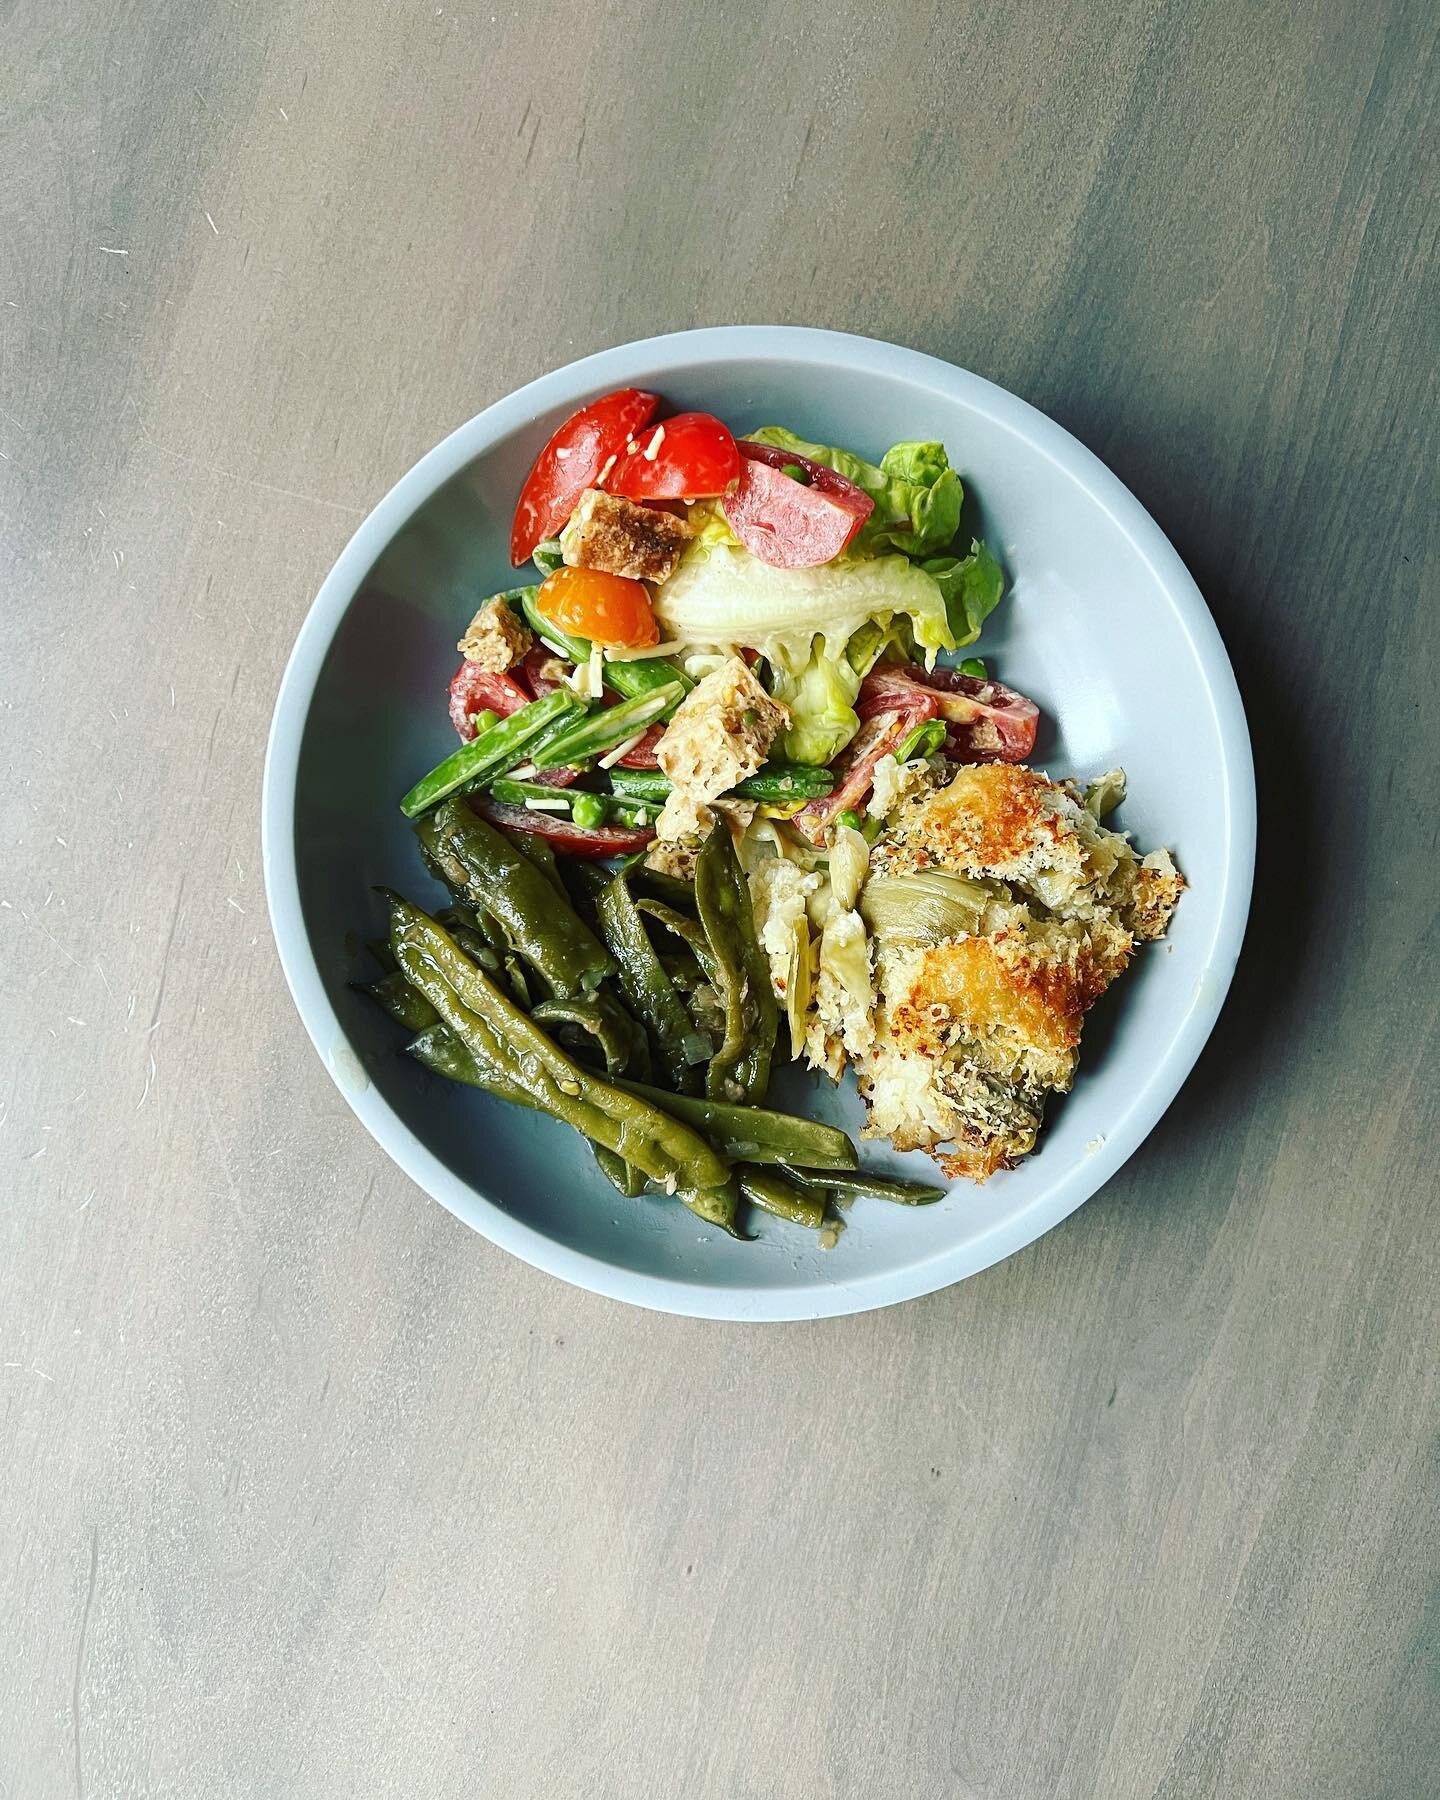 @ciaosamin&rsquo;s long cooked romano beans, @ericjoonho&rsquo;s broccoli rice casserole, but with artichokes, not broccoli, and a super quick summer salad of little gem lettuce, summer tomatoes, sugar snap peas, and croutons